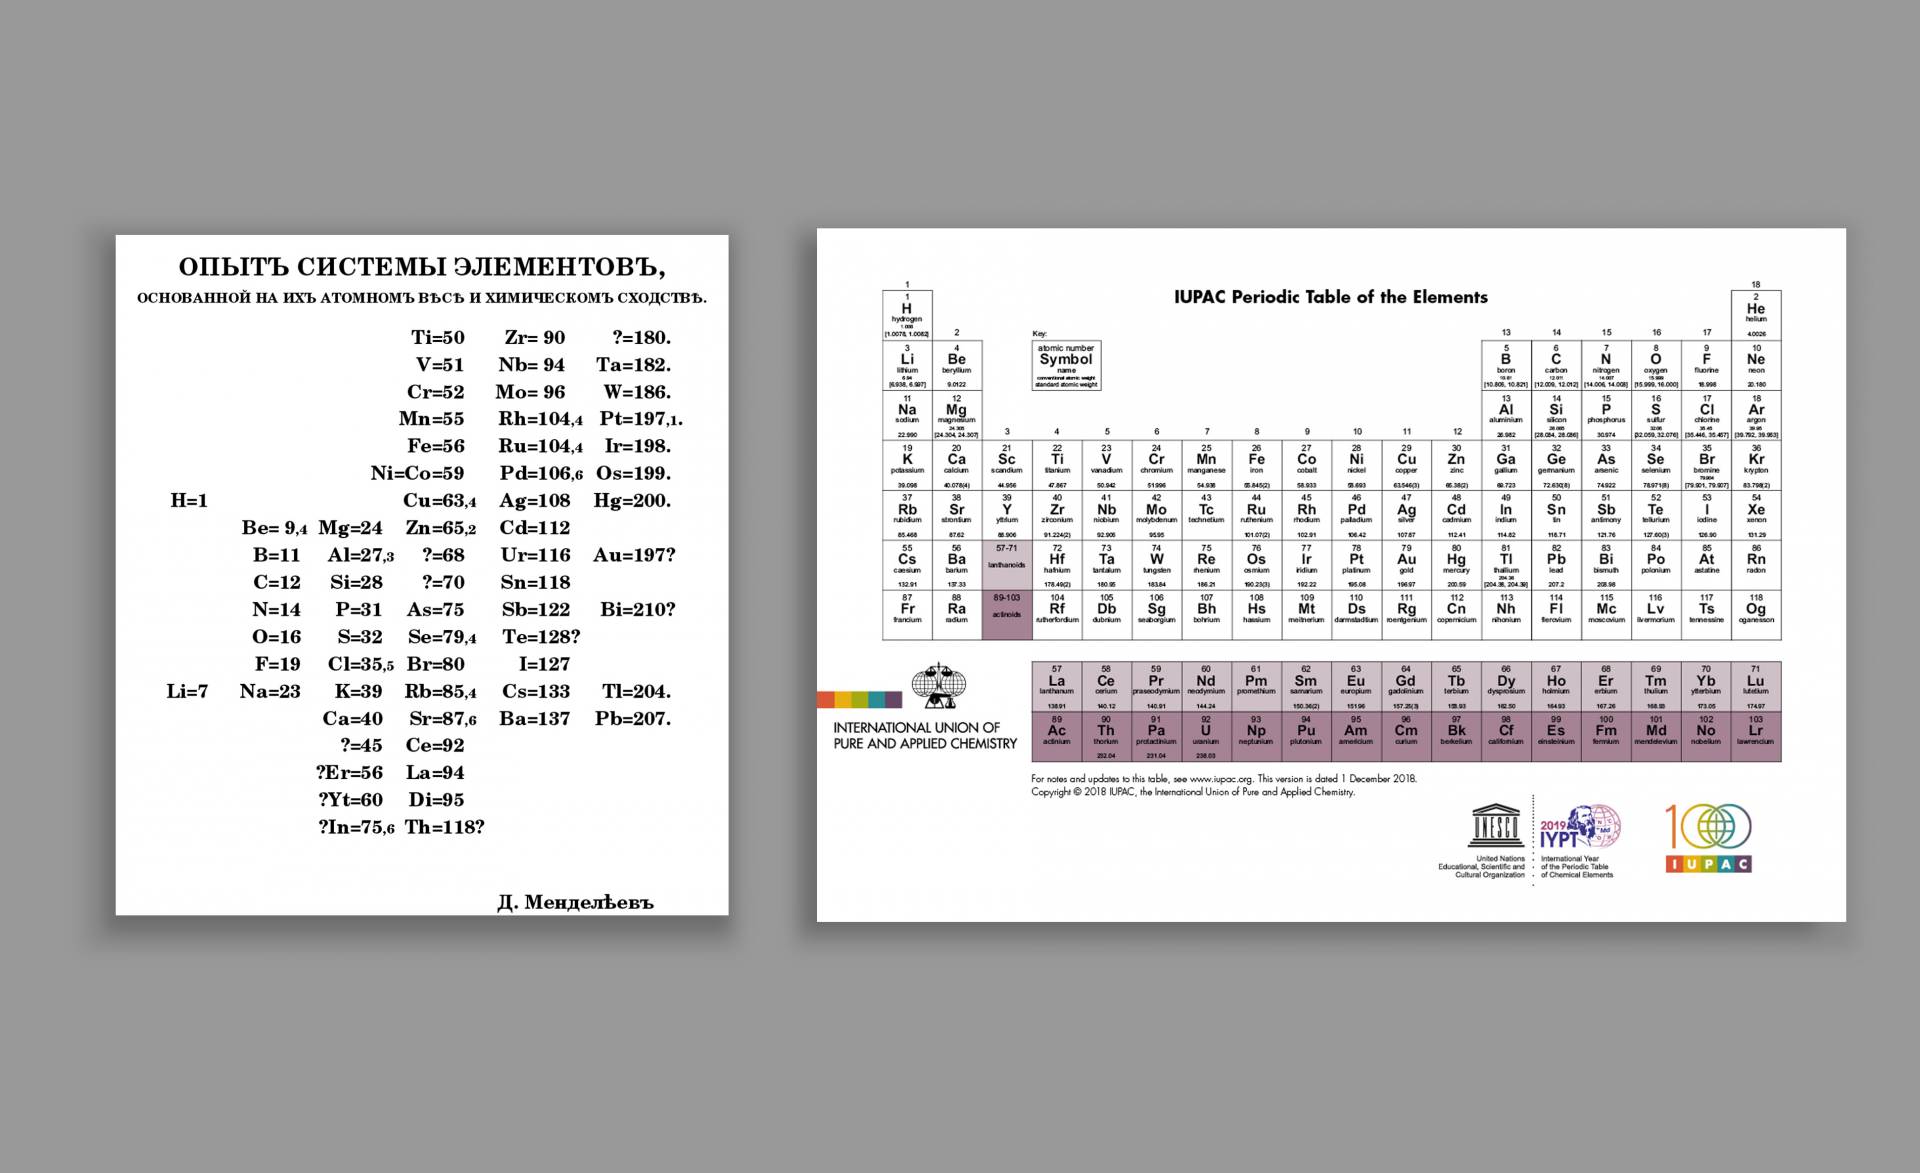 Comparison with Mendeleev's table of elements beside the current periodic table of elements